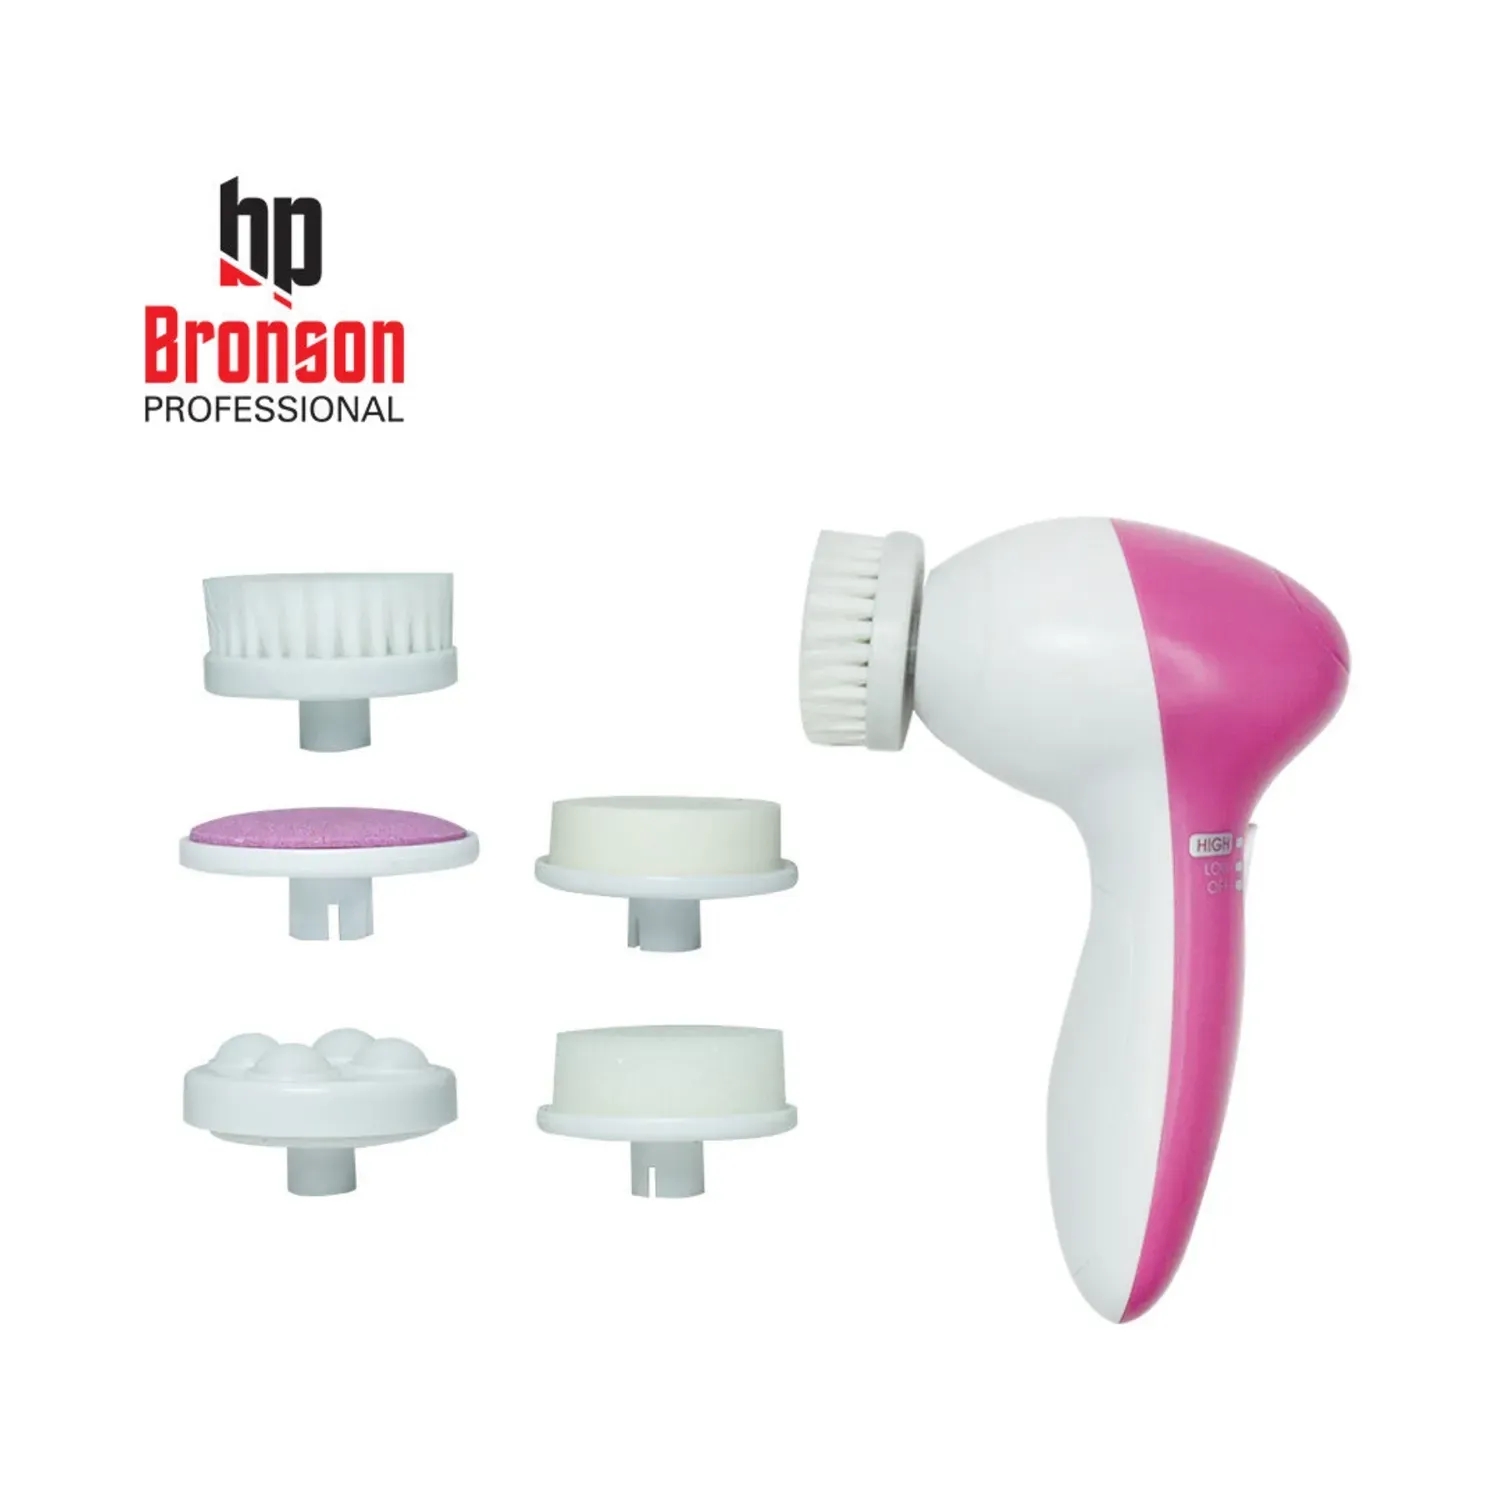 Bronson Professional | Bronson Professional 5 In 1 Body and Face Massage Tool with Nozzles (1Pc)